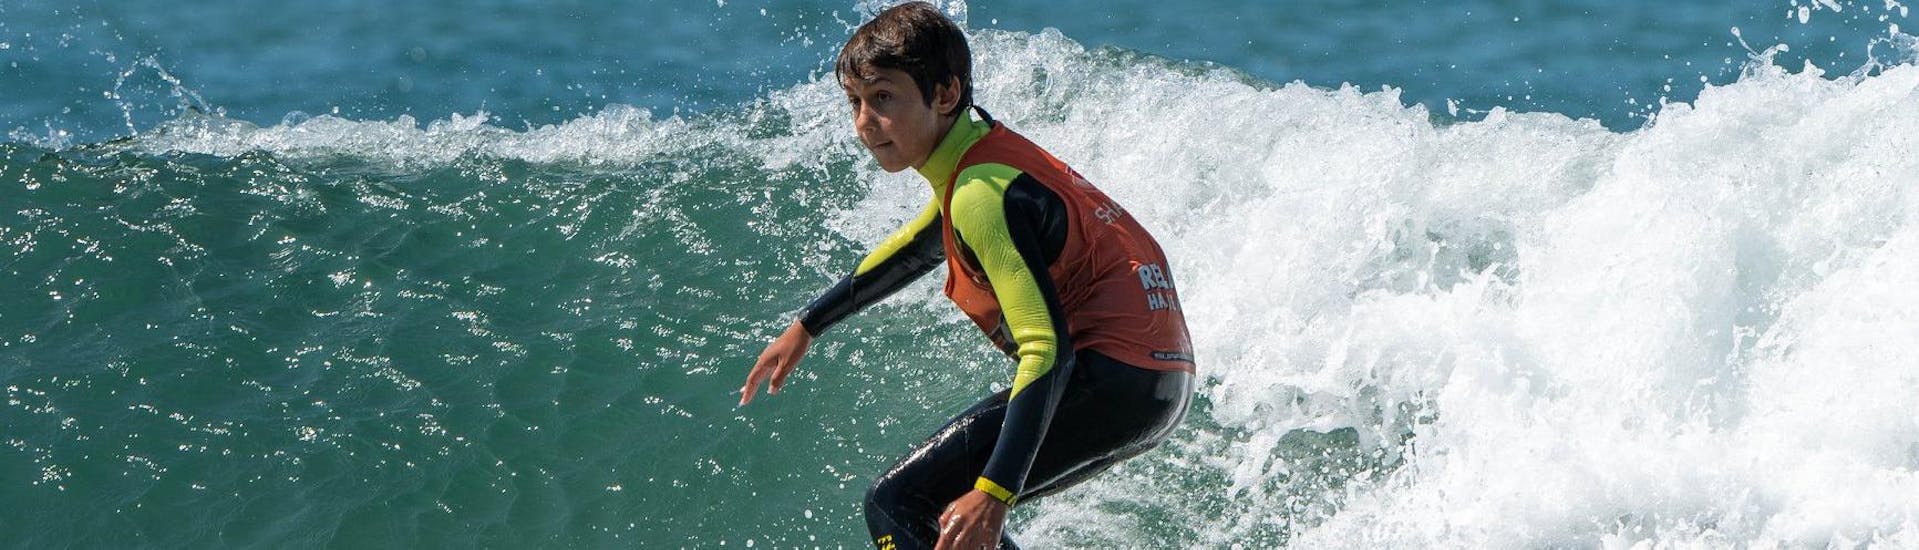 Under the guidance of an experienced surf instructor from Surfaventura, a boy is fully focused on riding his first wave during the surfing lessons on Matosinhos Beach.